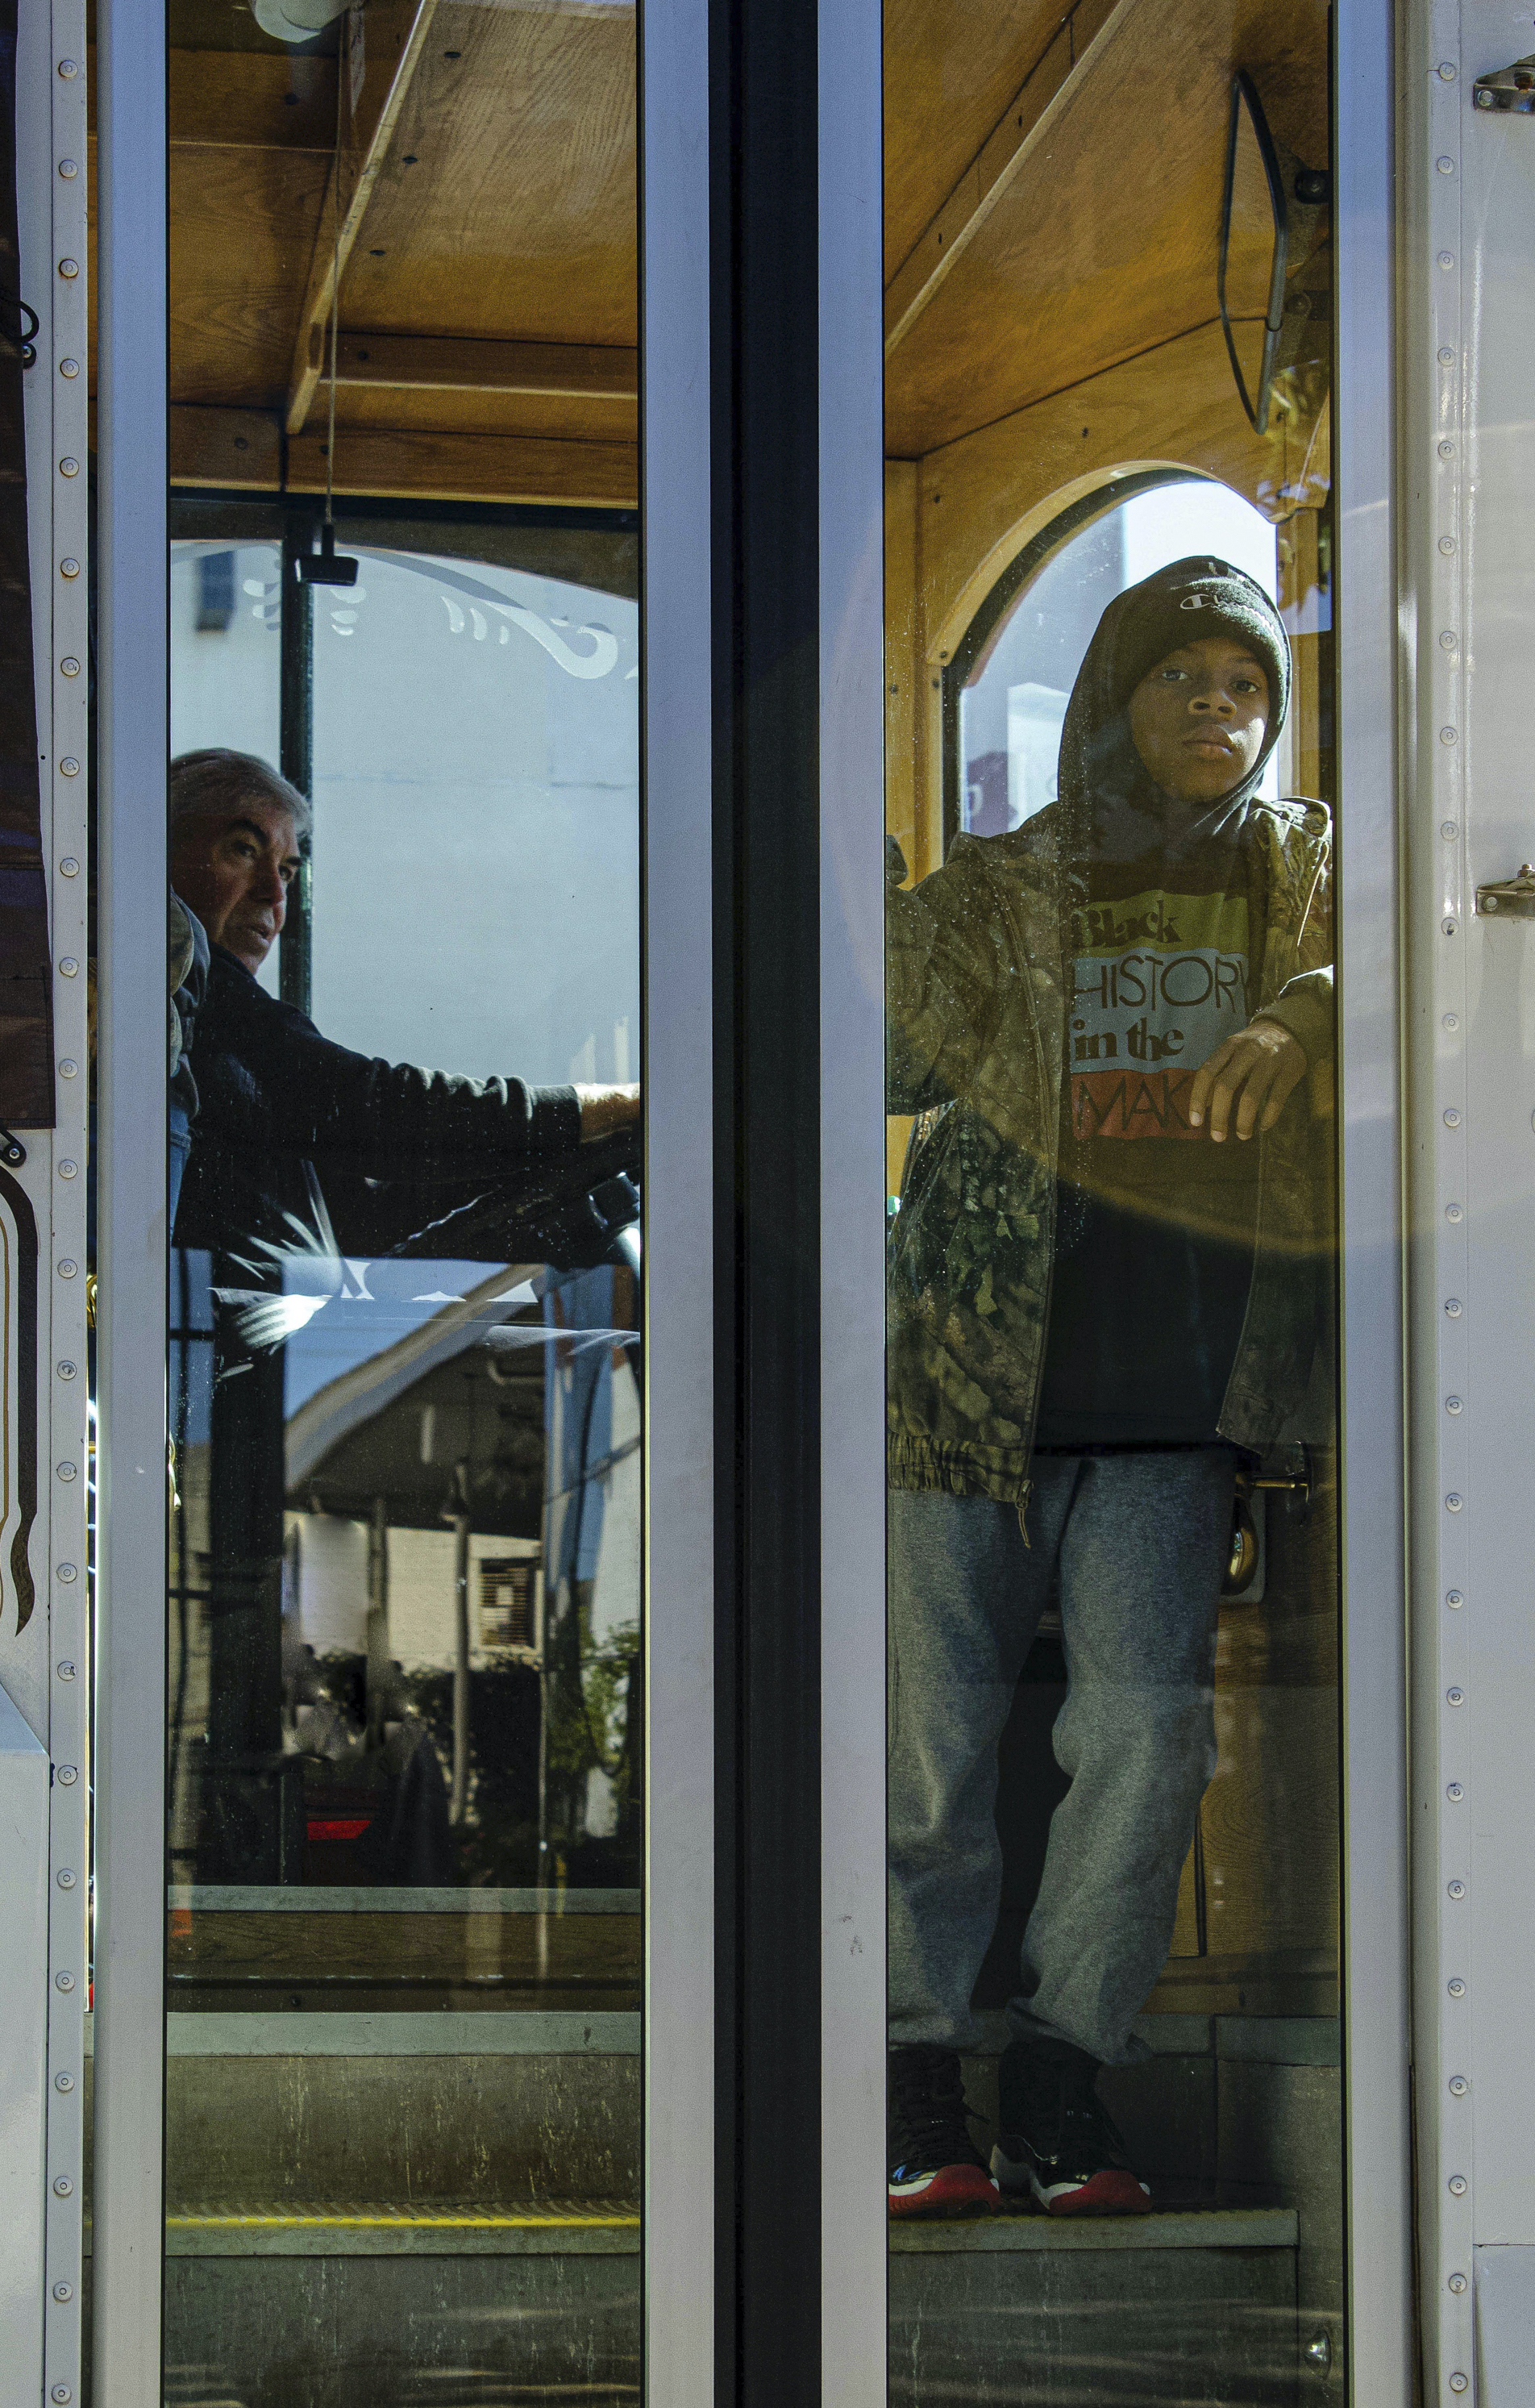 A little boy in jeans and a hoodie standing in the entrance of a bus looking out the door windows. The driver stares at him. 